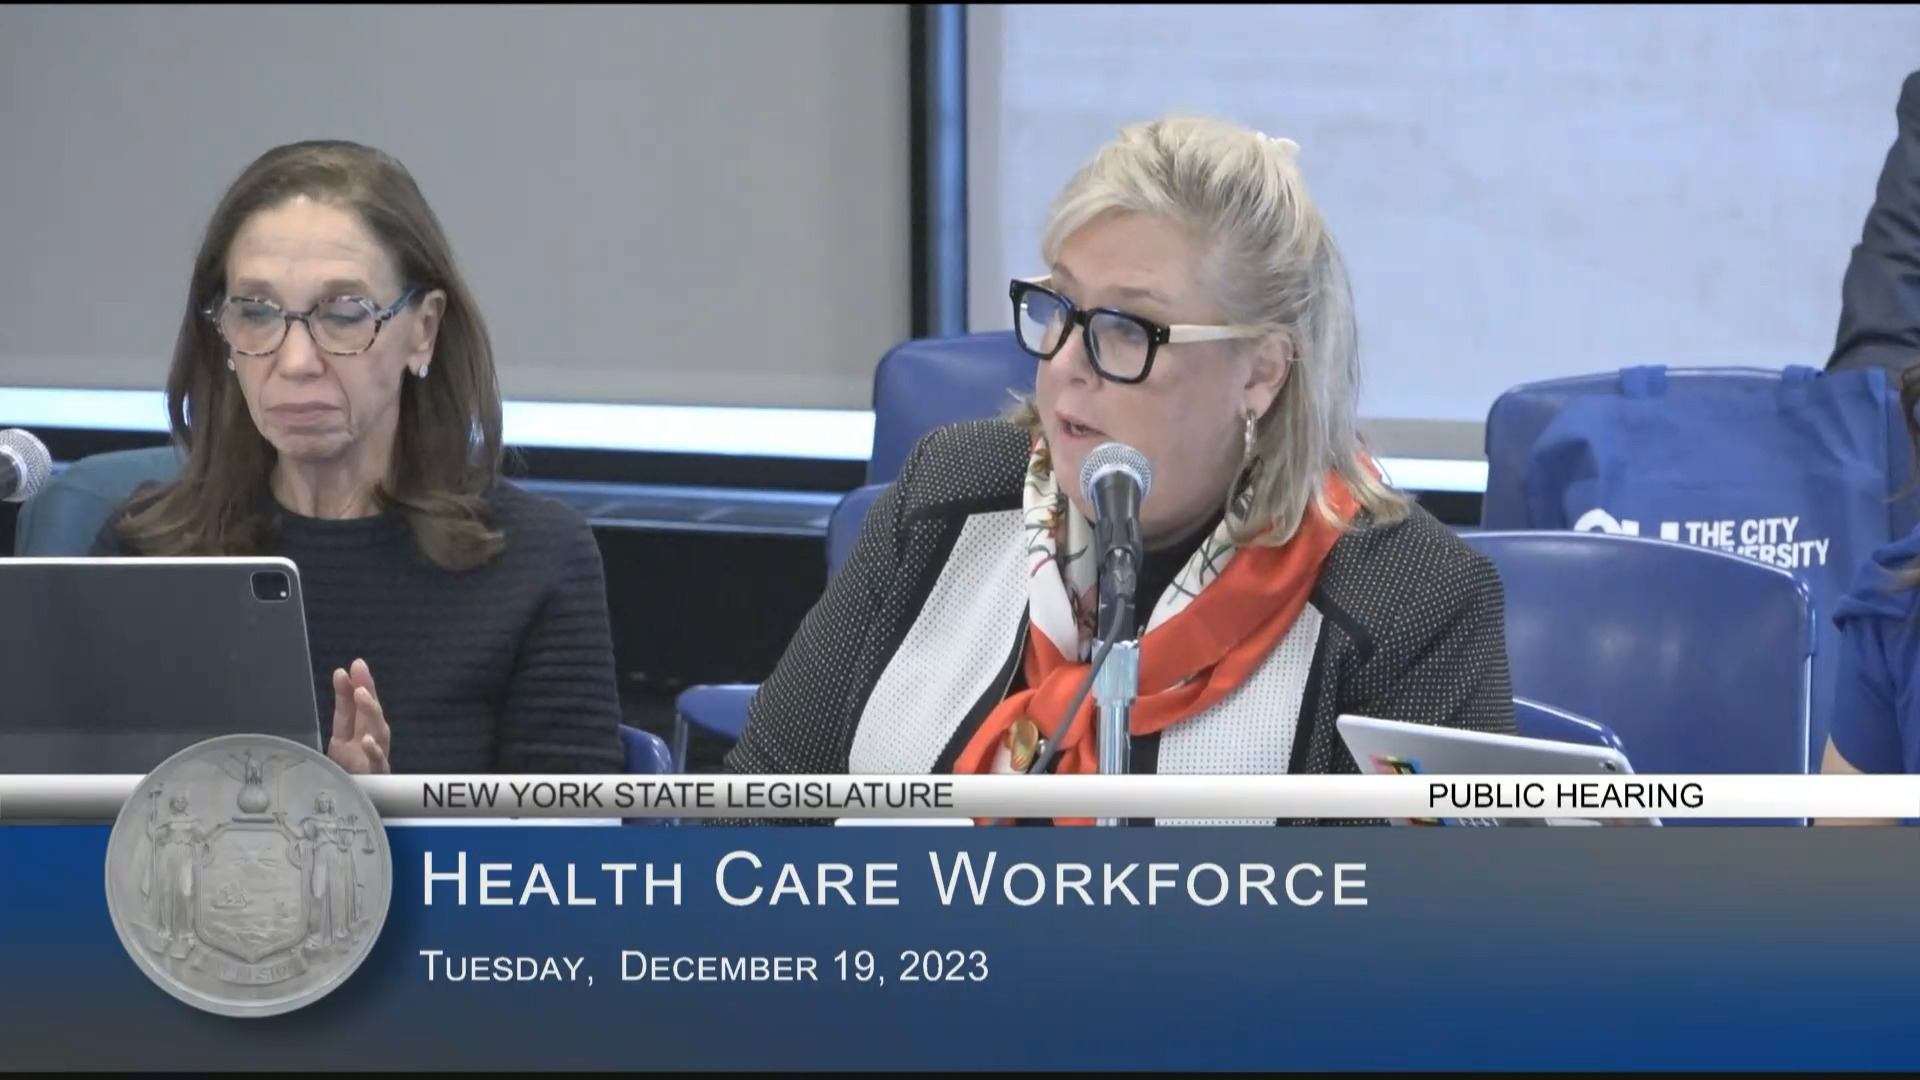 Seawright Co-Chairs Public Hearing on Status of the Health Care Workforce in New York State